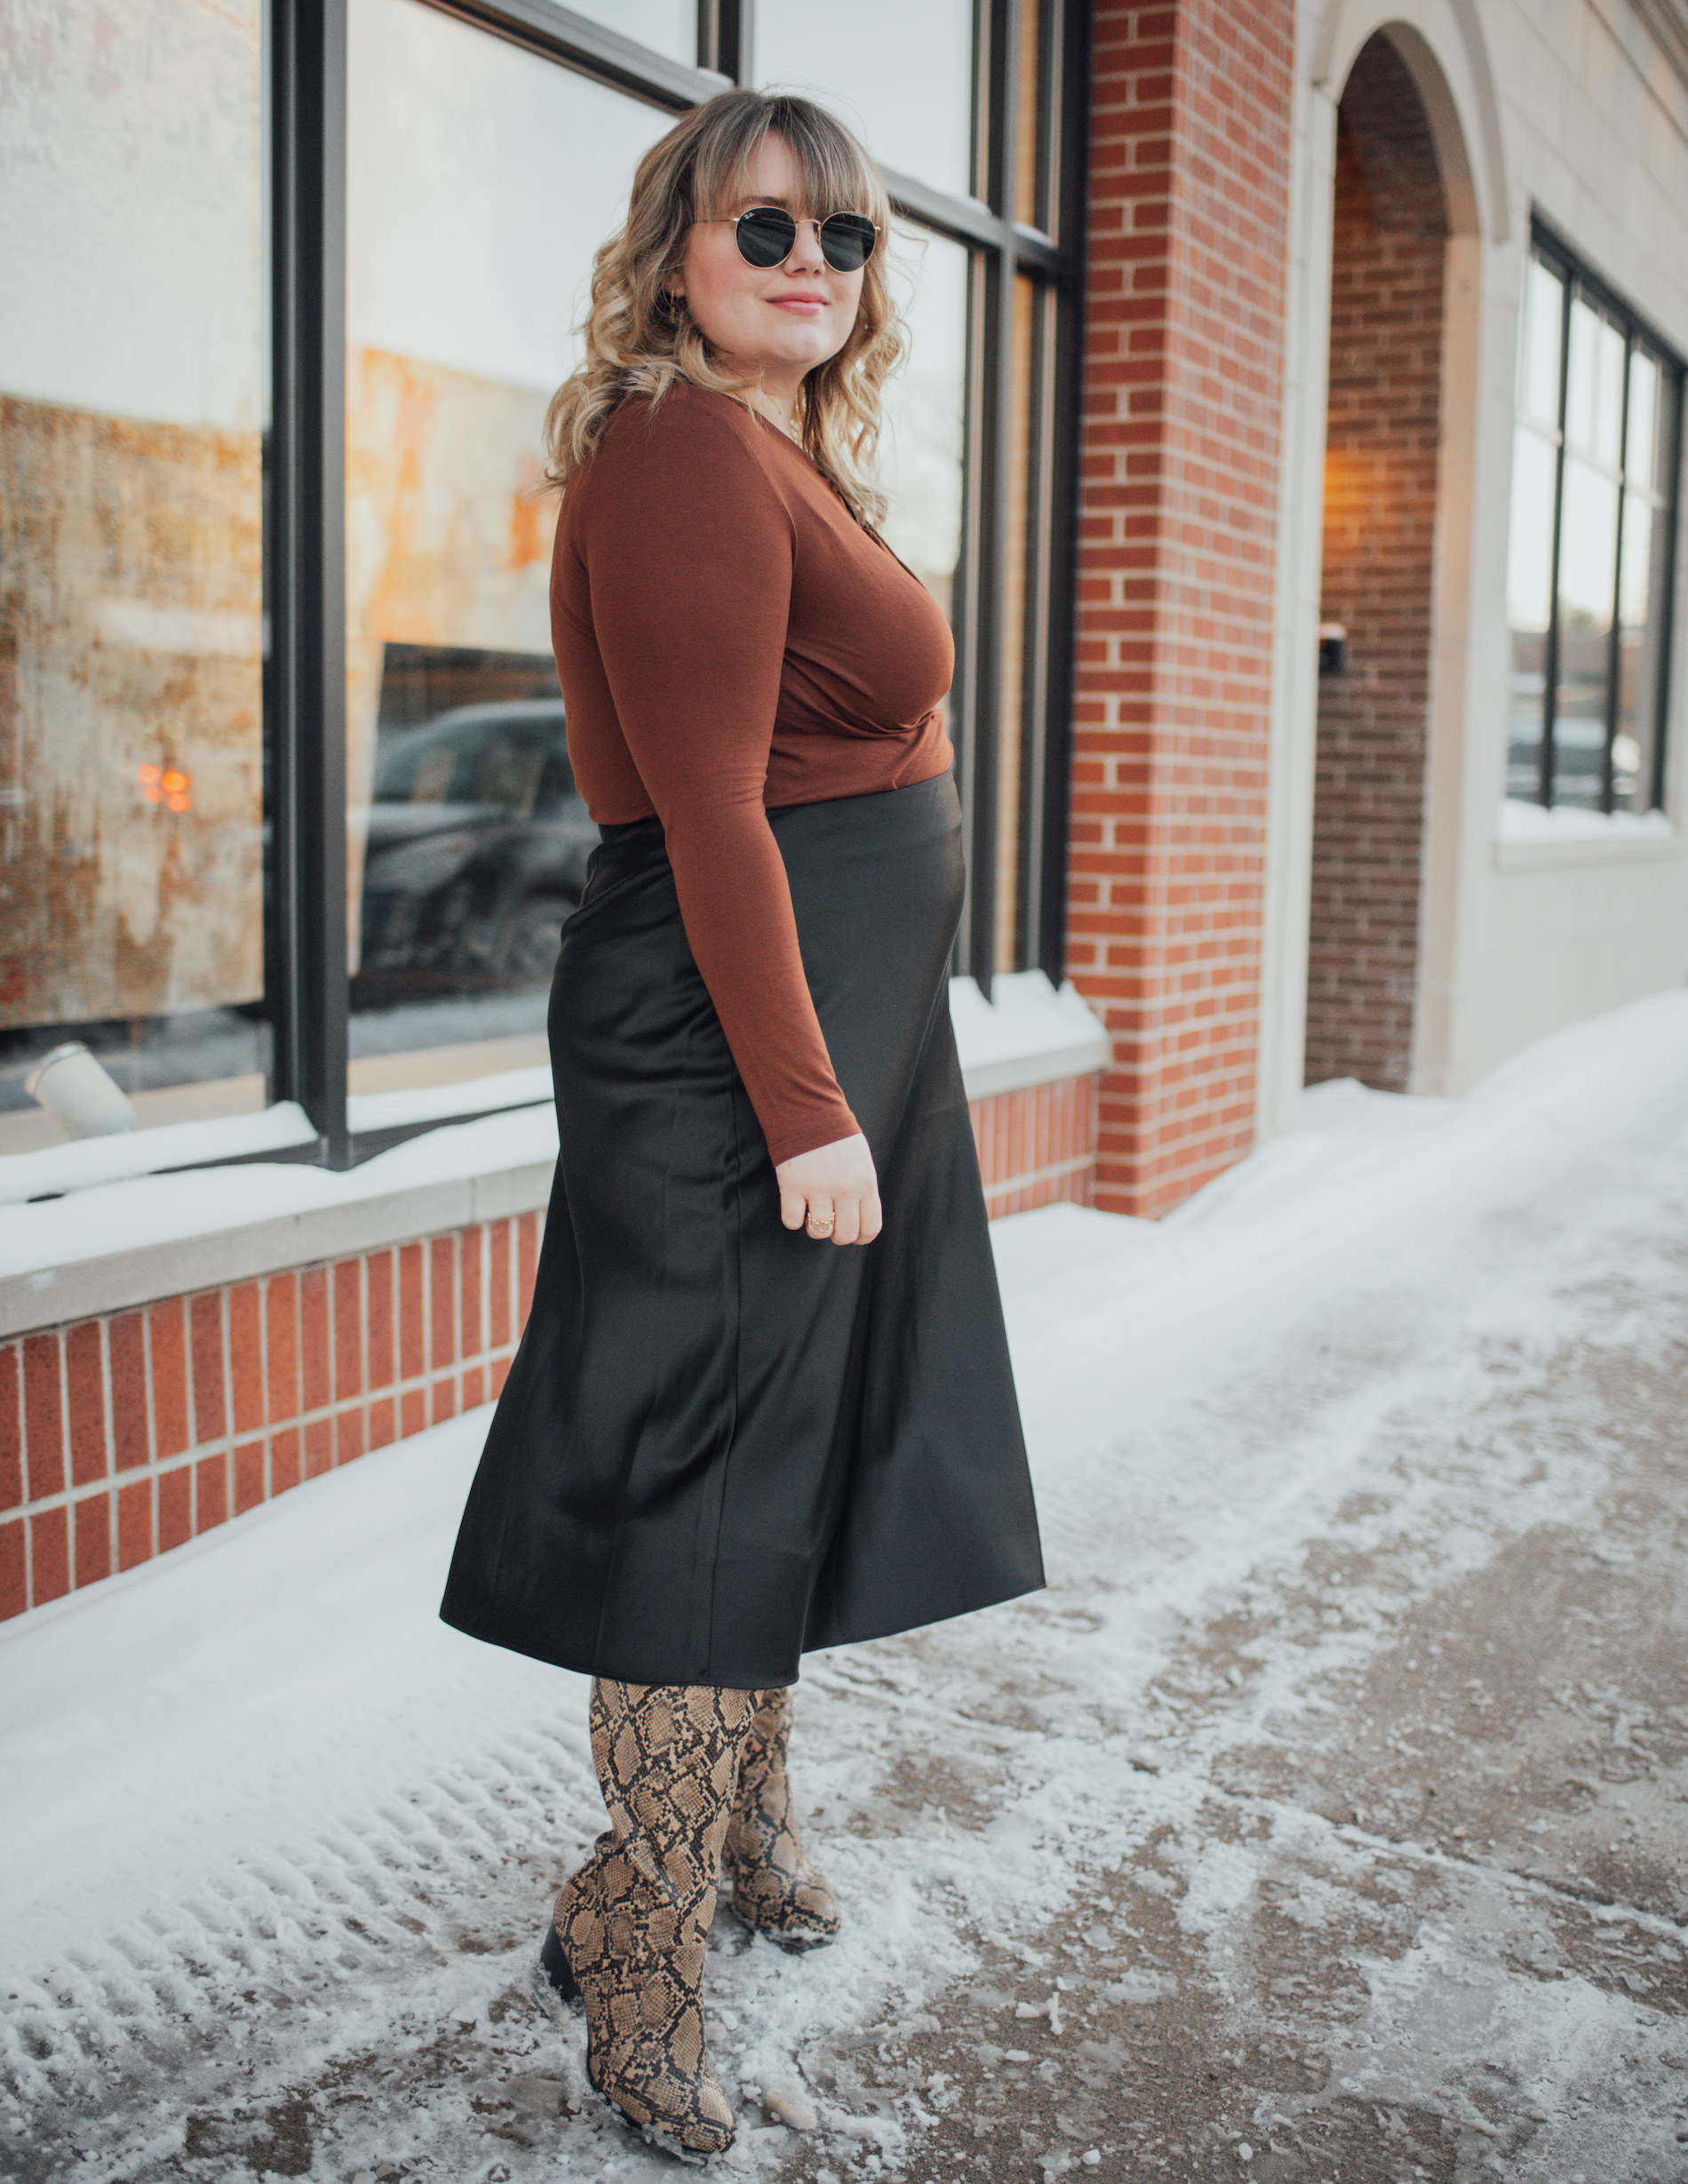 Winter Date Night Out means I am getting dressed in my cutest and warmest outfit! This week its a knit top and skirt with boots to match! 